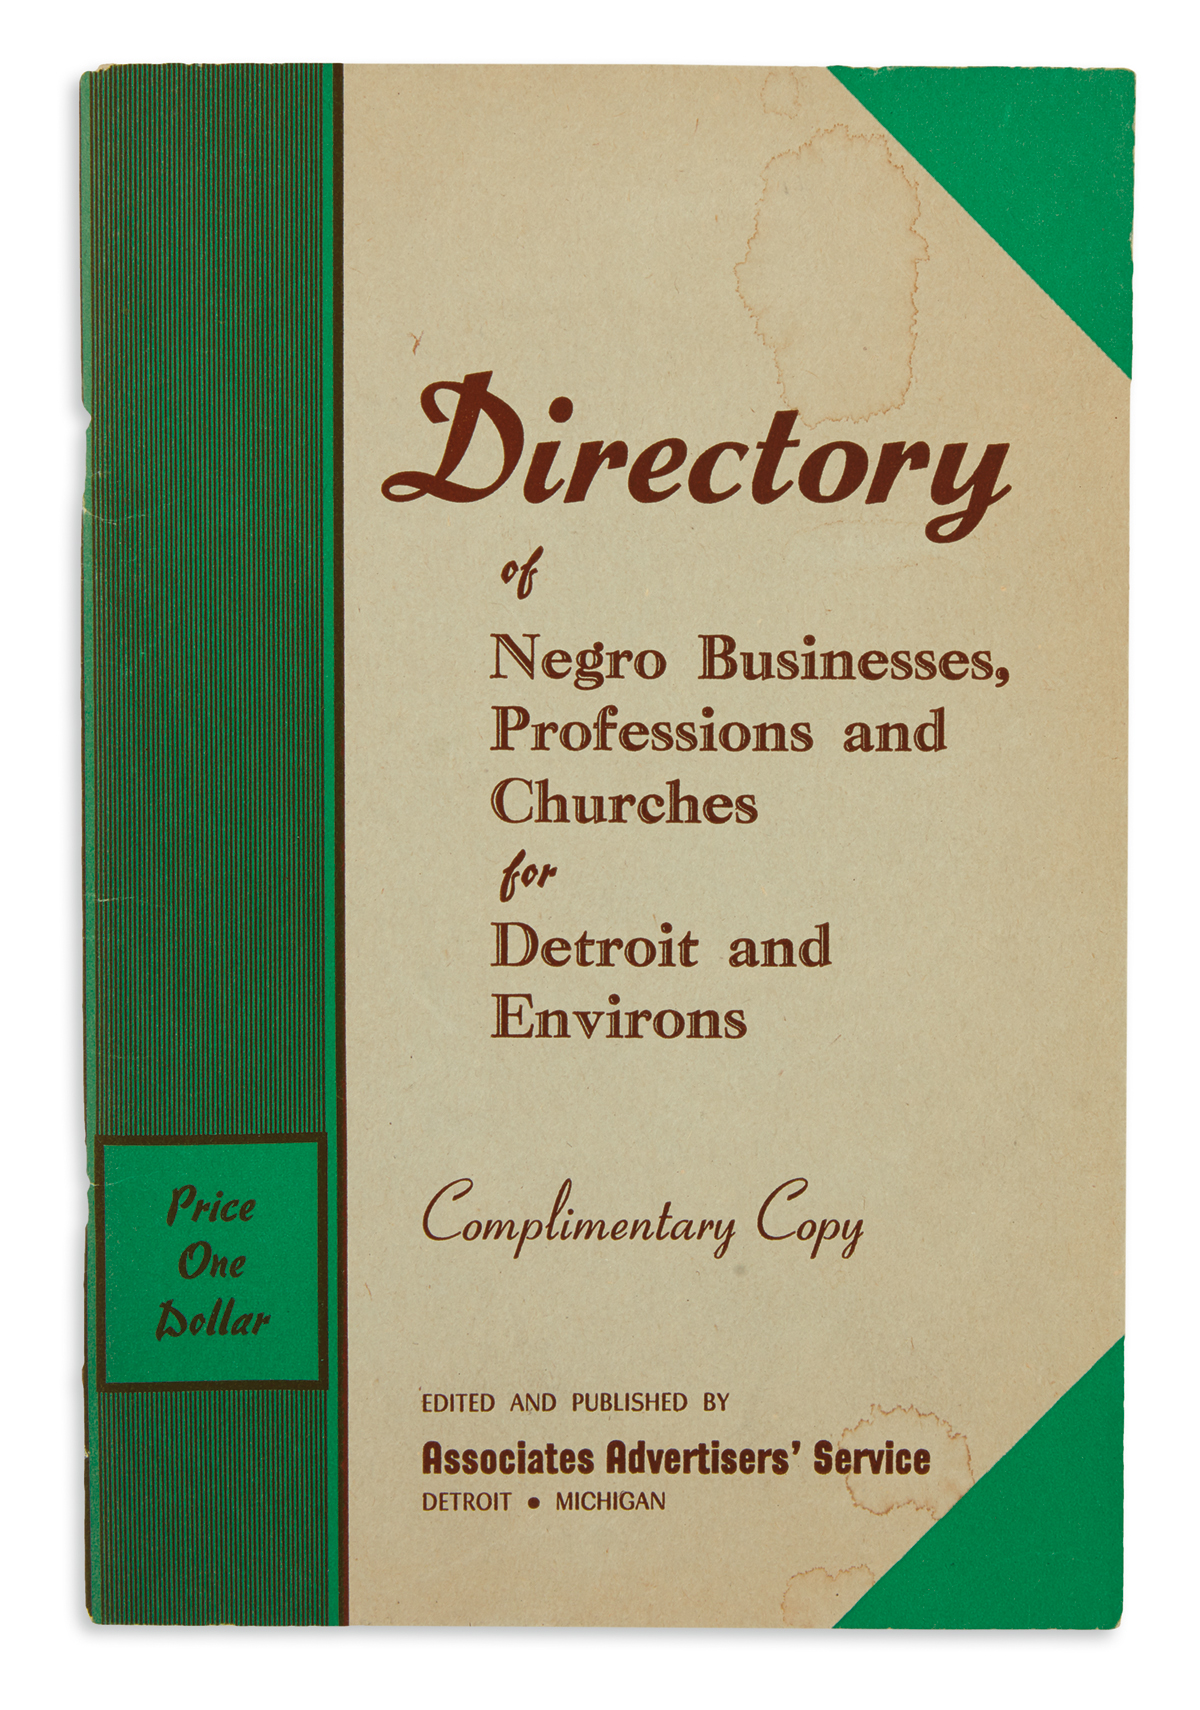 (BUSINESS.) Directory of Negro Businesses, Professions and Churches for Detroit and Environs.